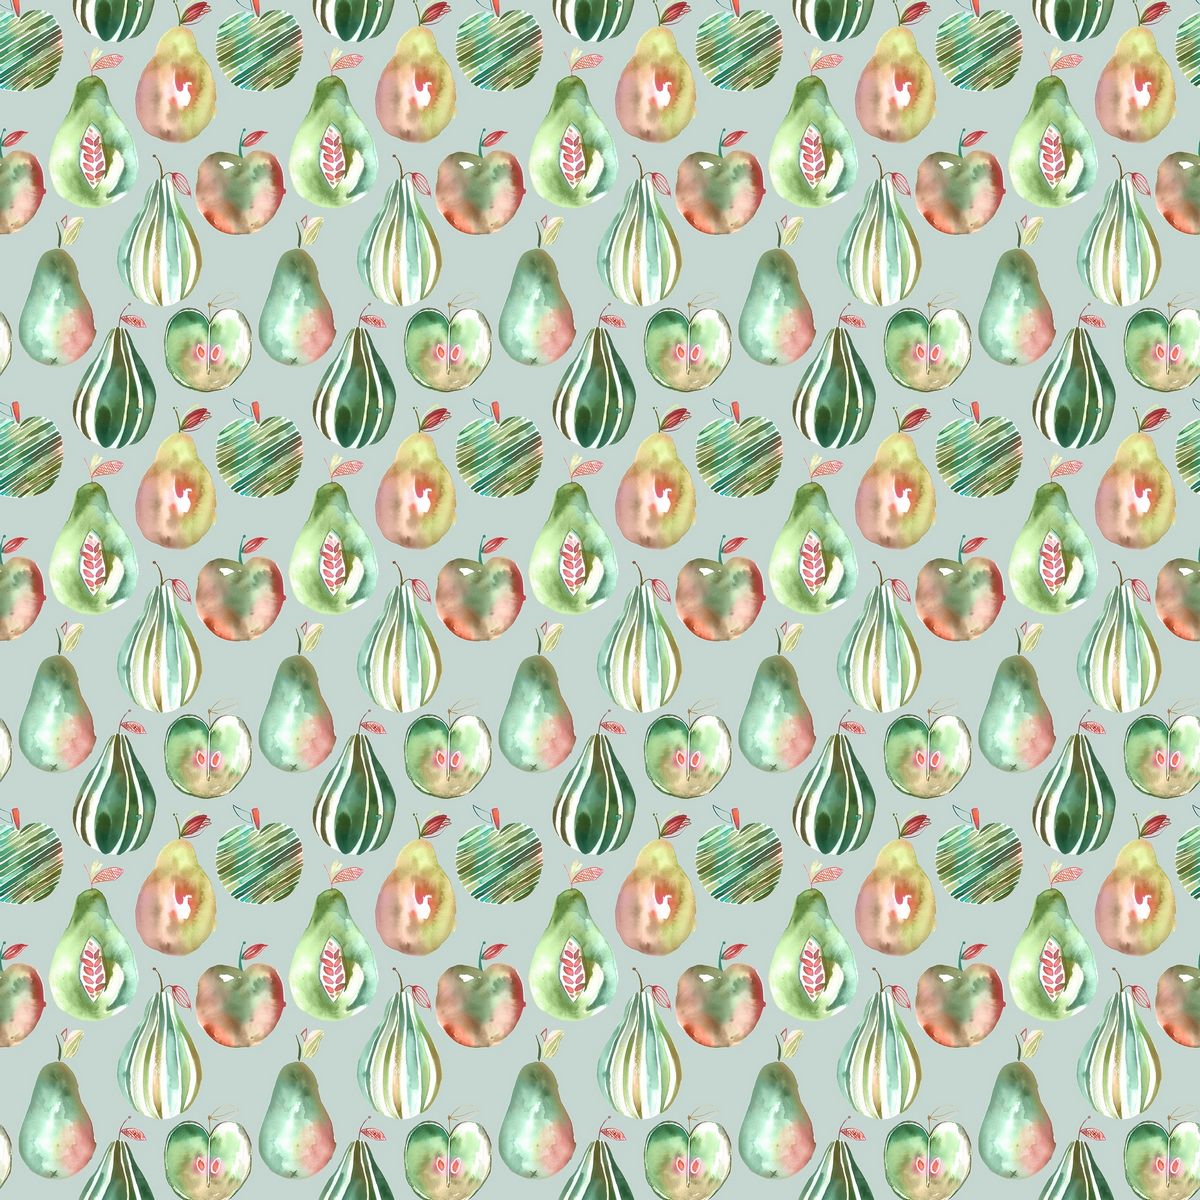 Pears Harvest Fabric by Voyage Maison